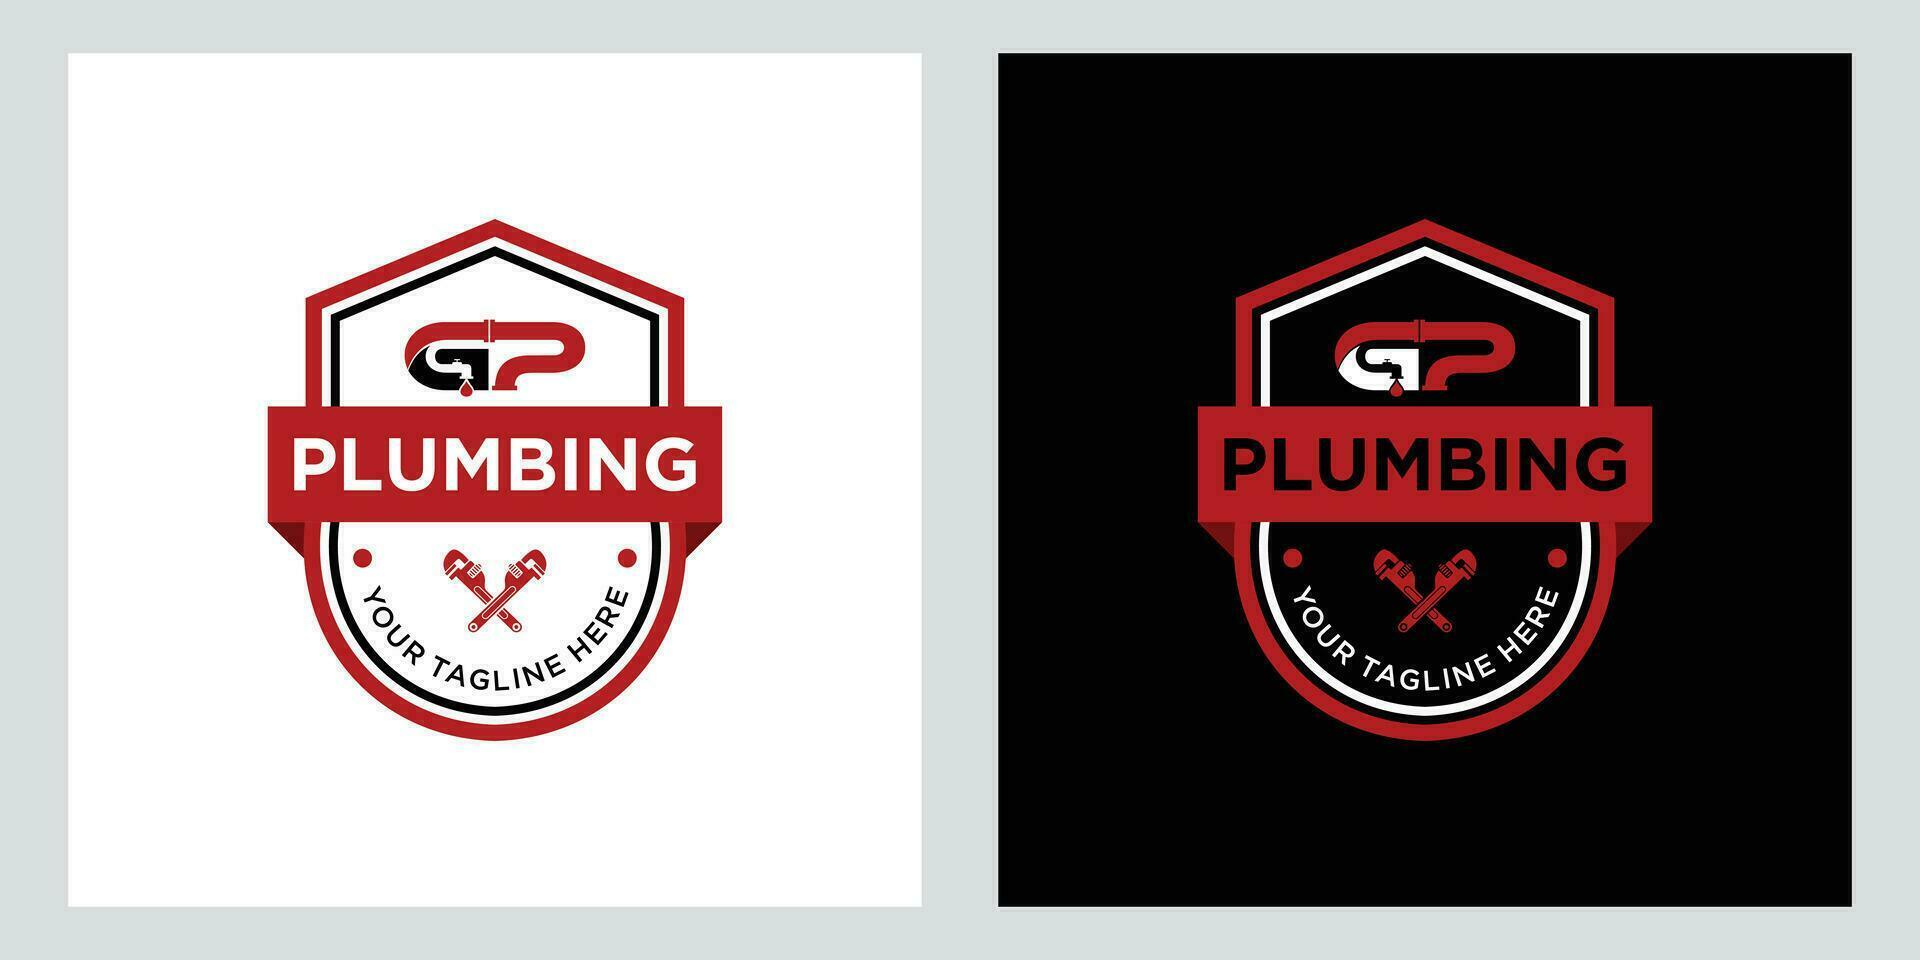 Plumbing logo template with retro or vintage style, vector illustration